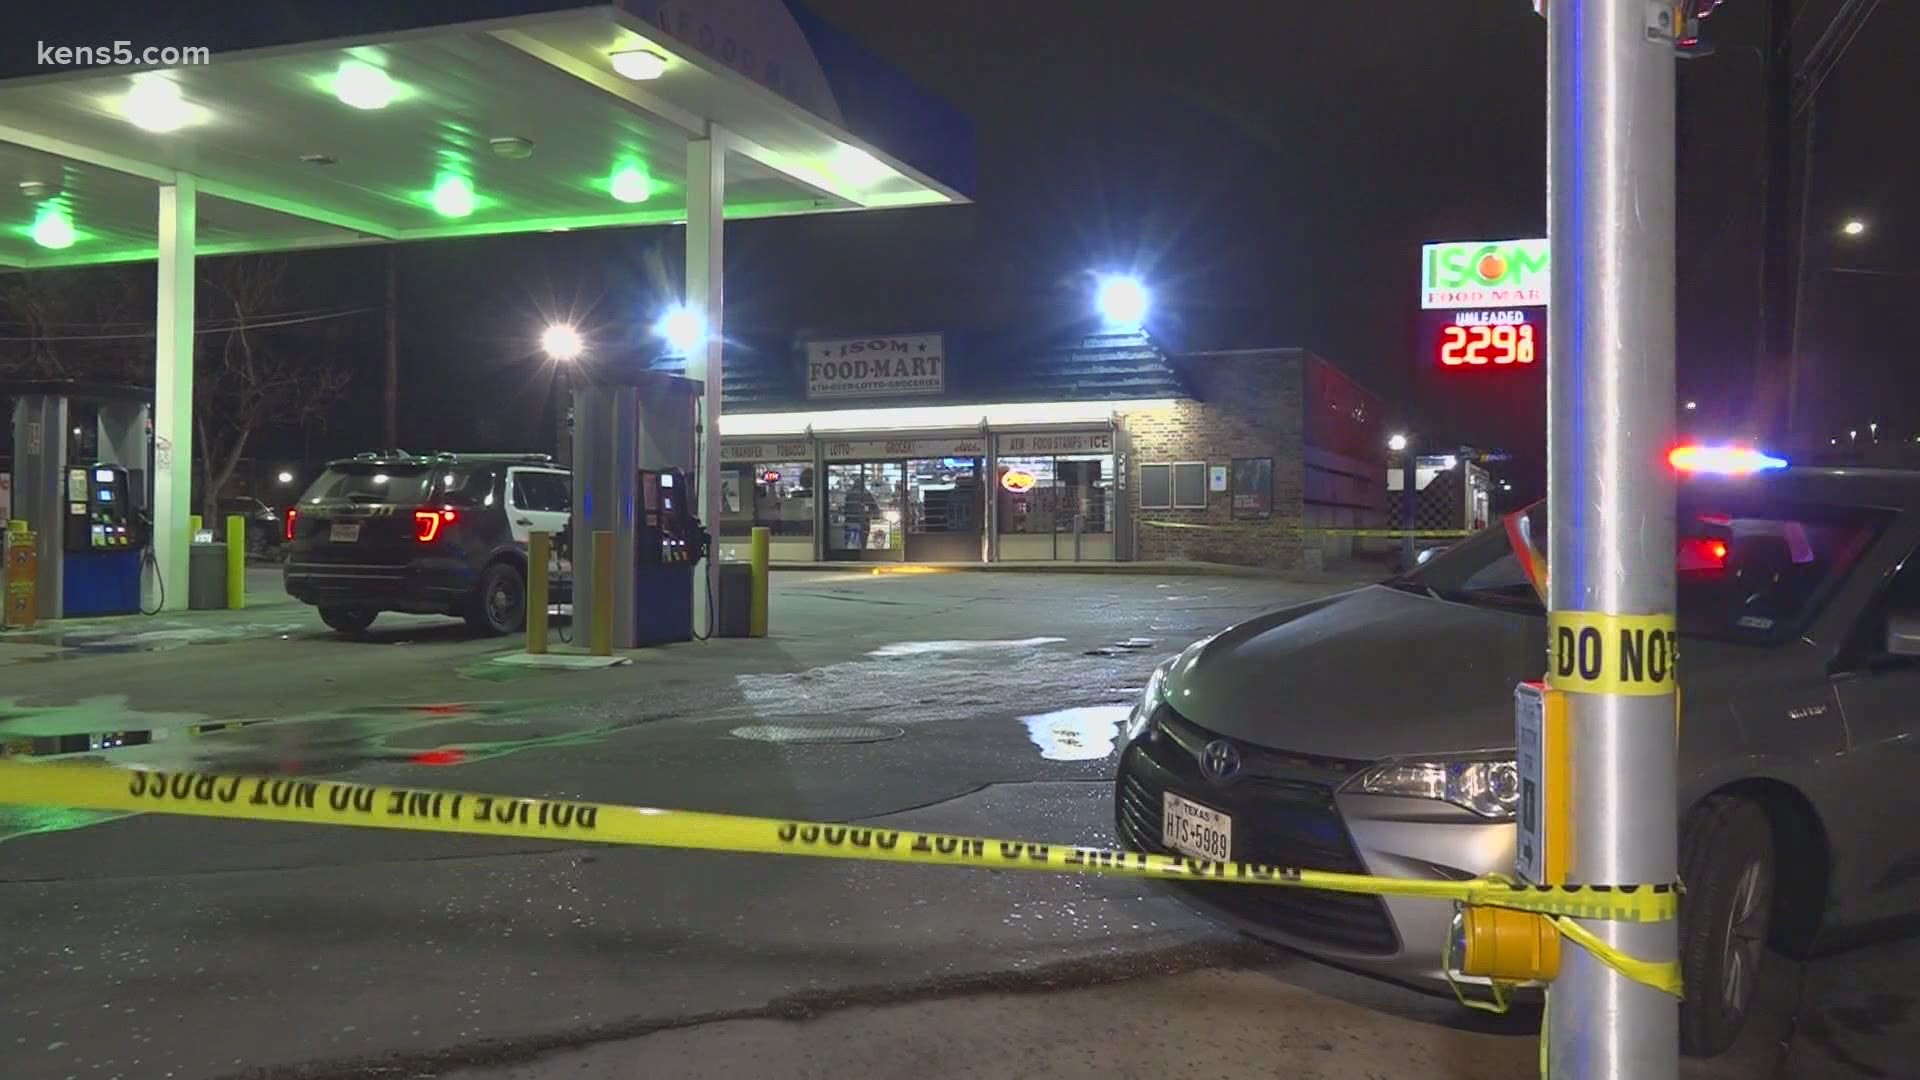 Police say a convenience store clerk shot an armed man who was stealing from his store.